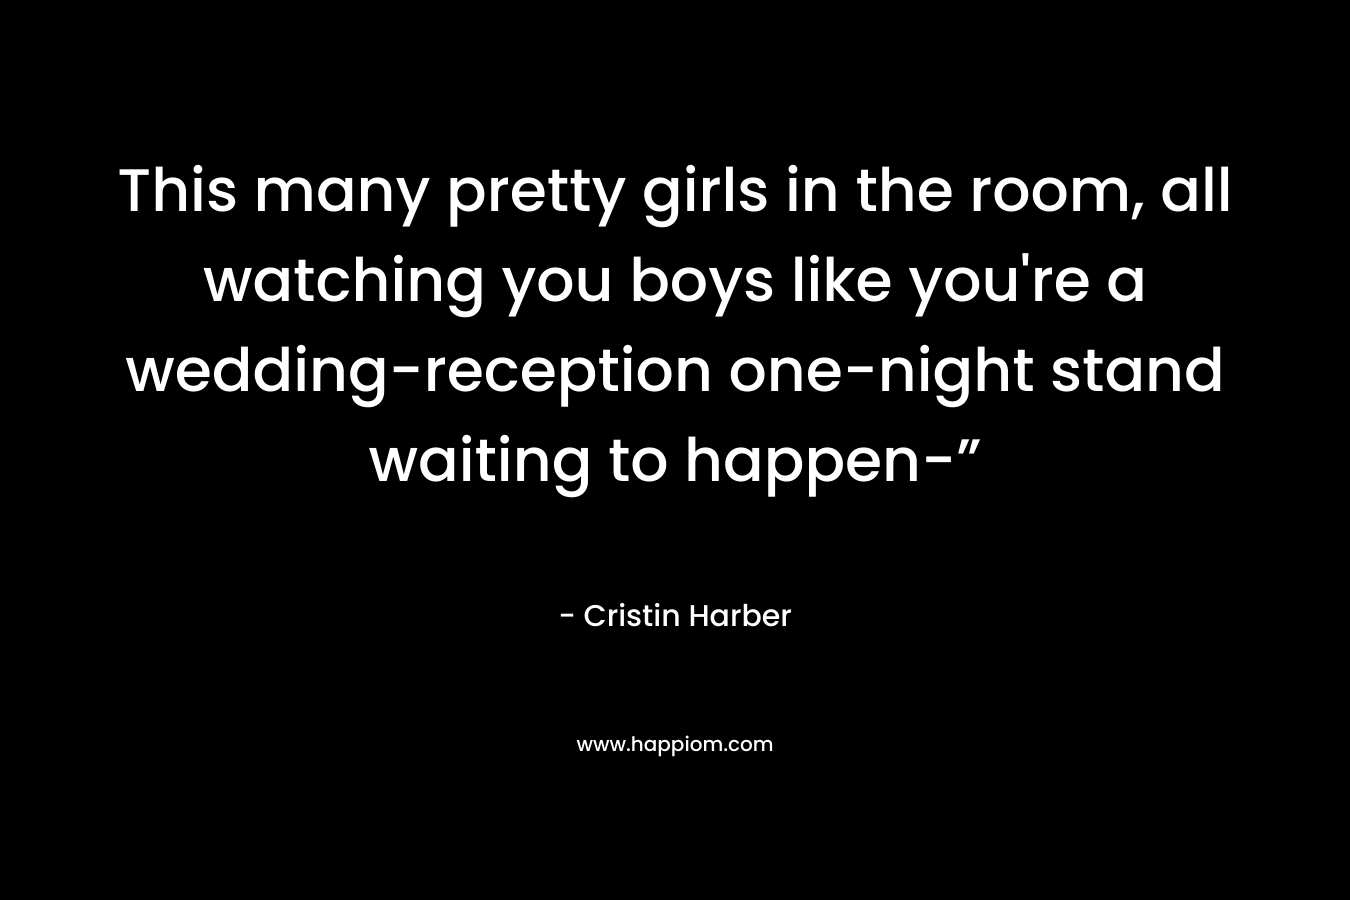 This many pretty girls in the room, all watching you boys like you’re a wedding-reception one-night stand waiting to happen-” – Cristin Harber